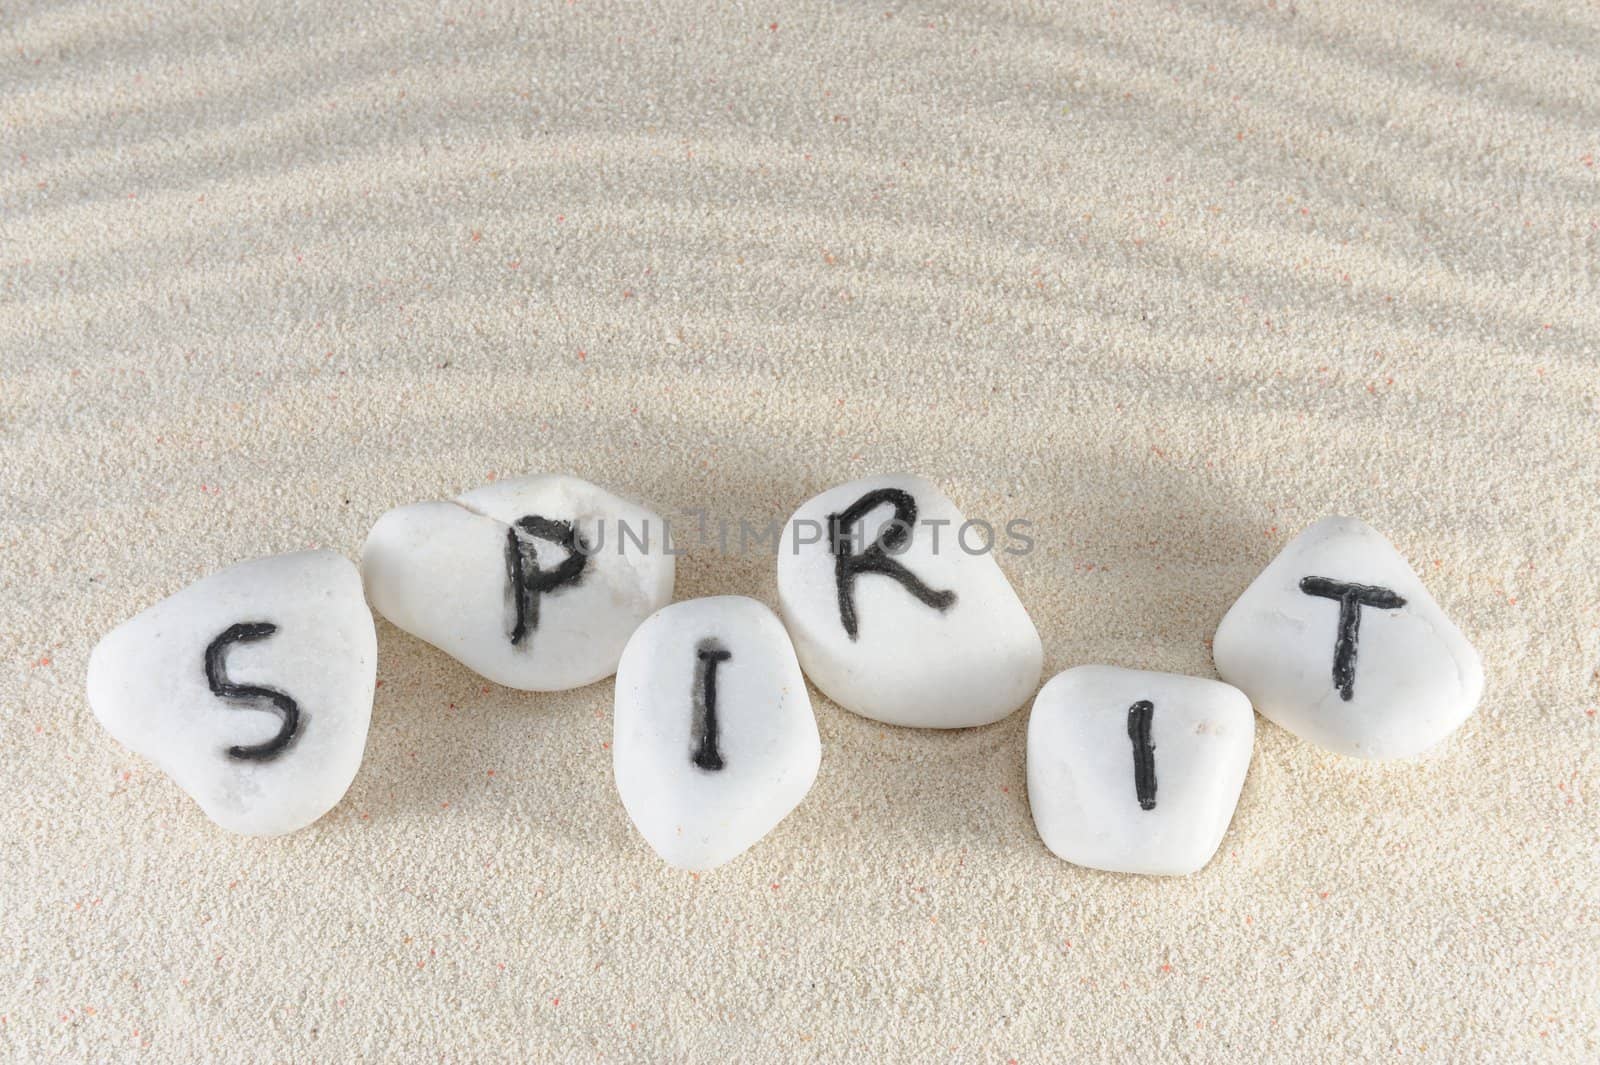 Spirit word on group of stones with sand background